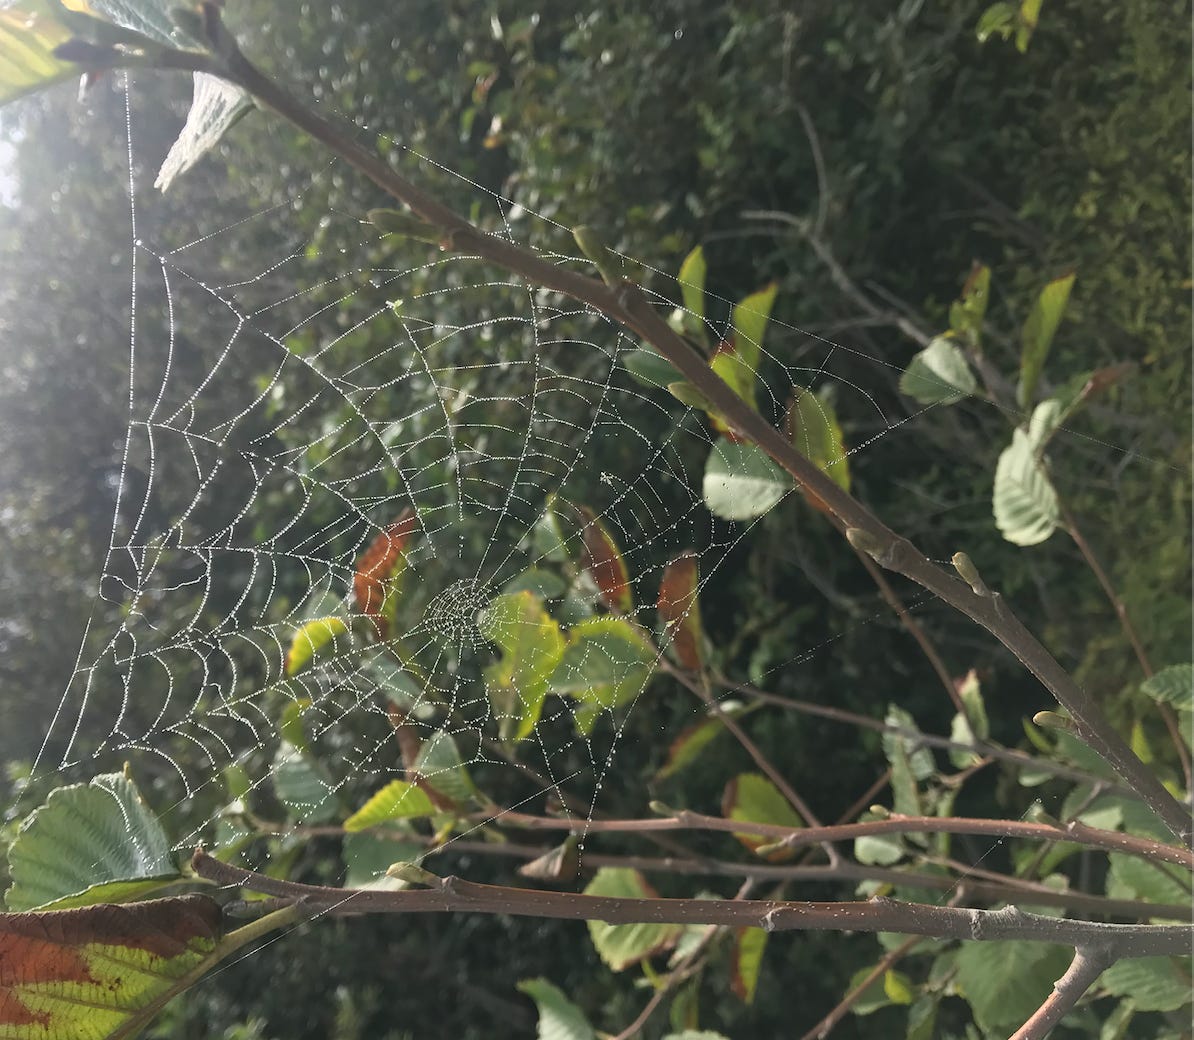 Spider web coated in dew.